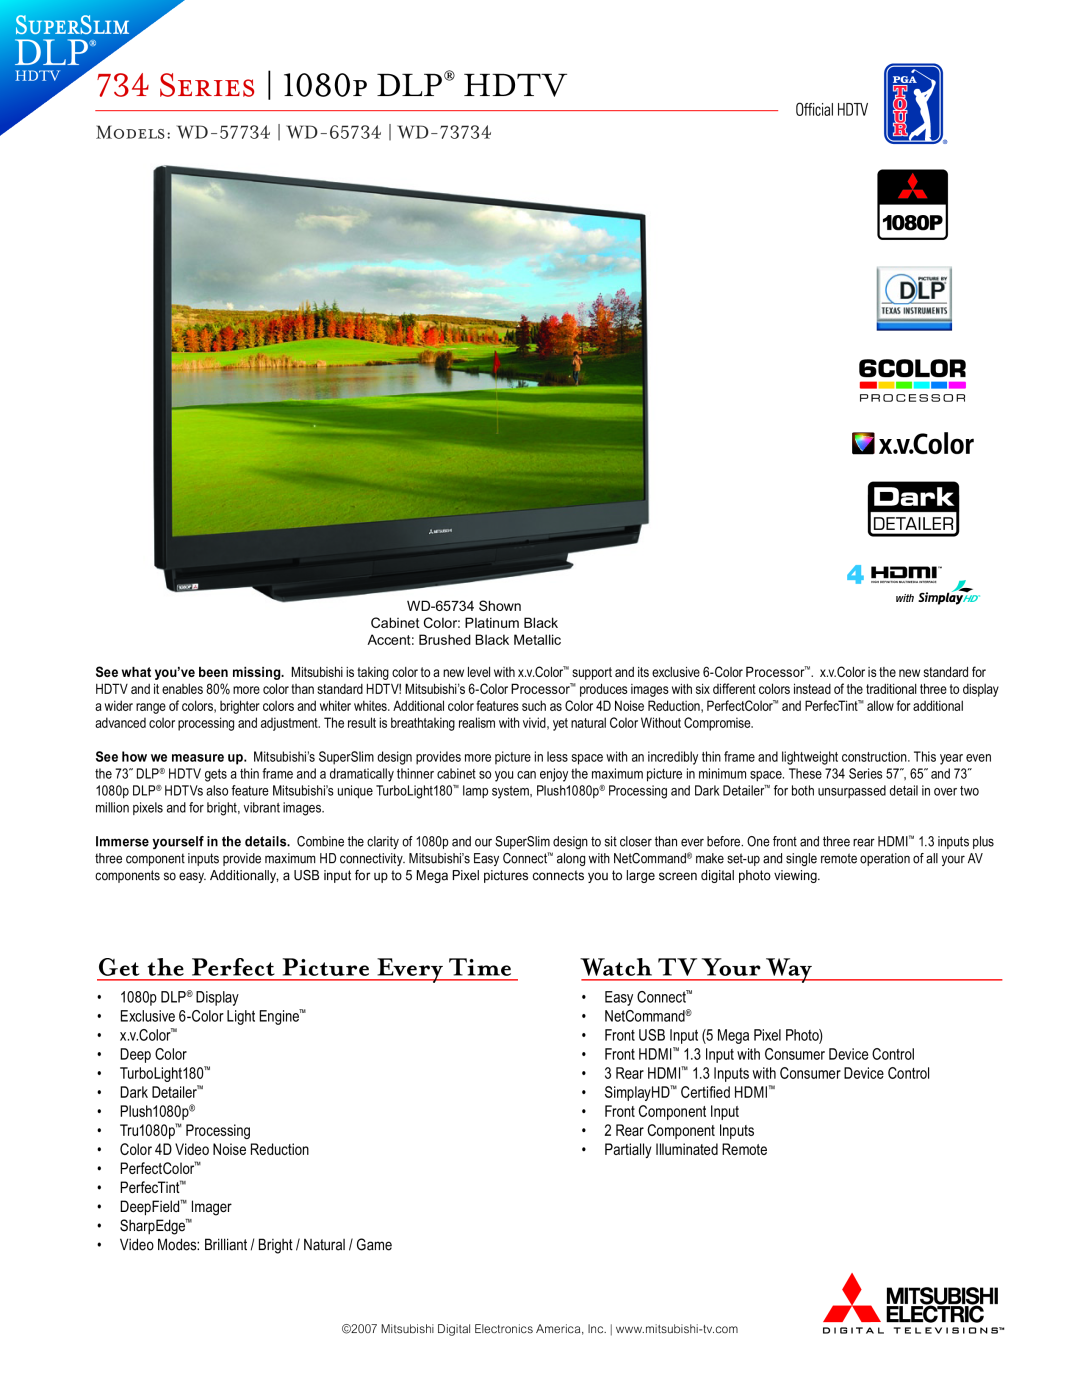 Mitsubishi Electronics WD-65734 manual Watch TV Your Way, Series 1080p DLP HDTV, Get the Perfect Picture Every Time 